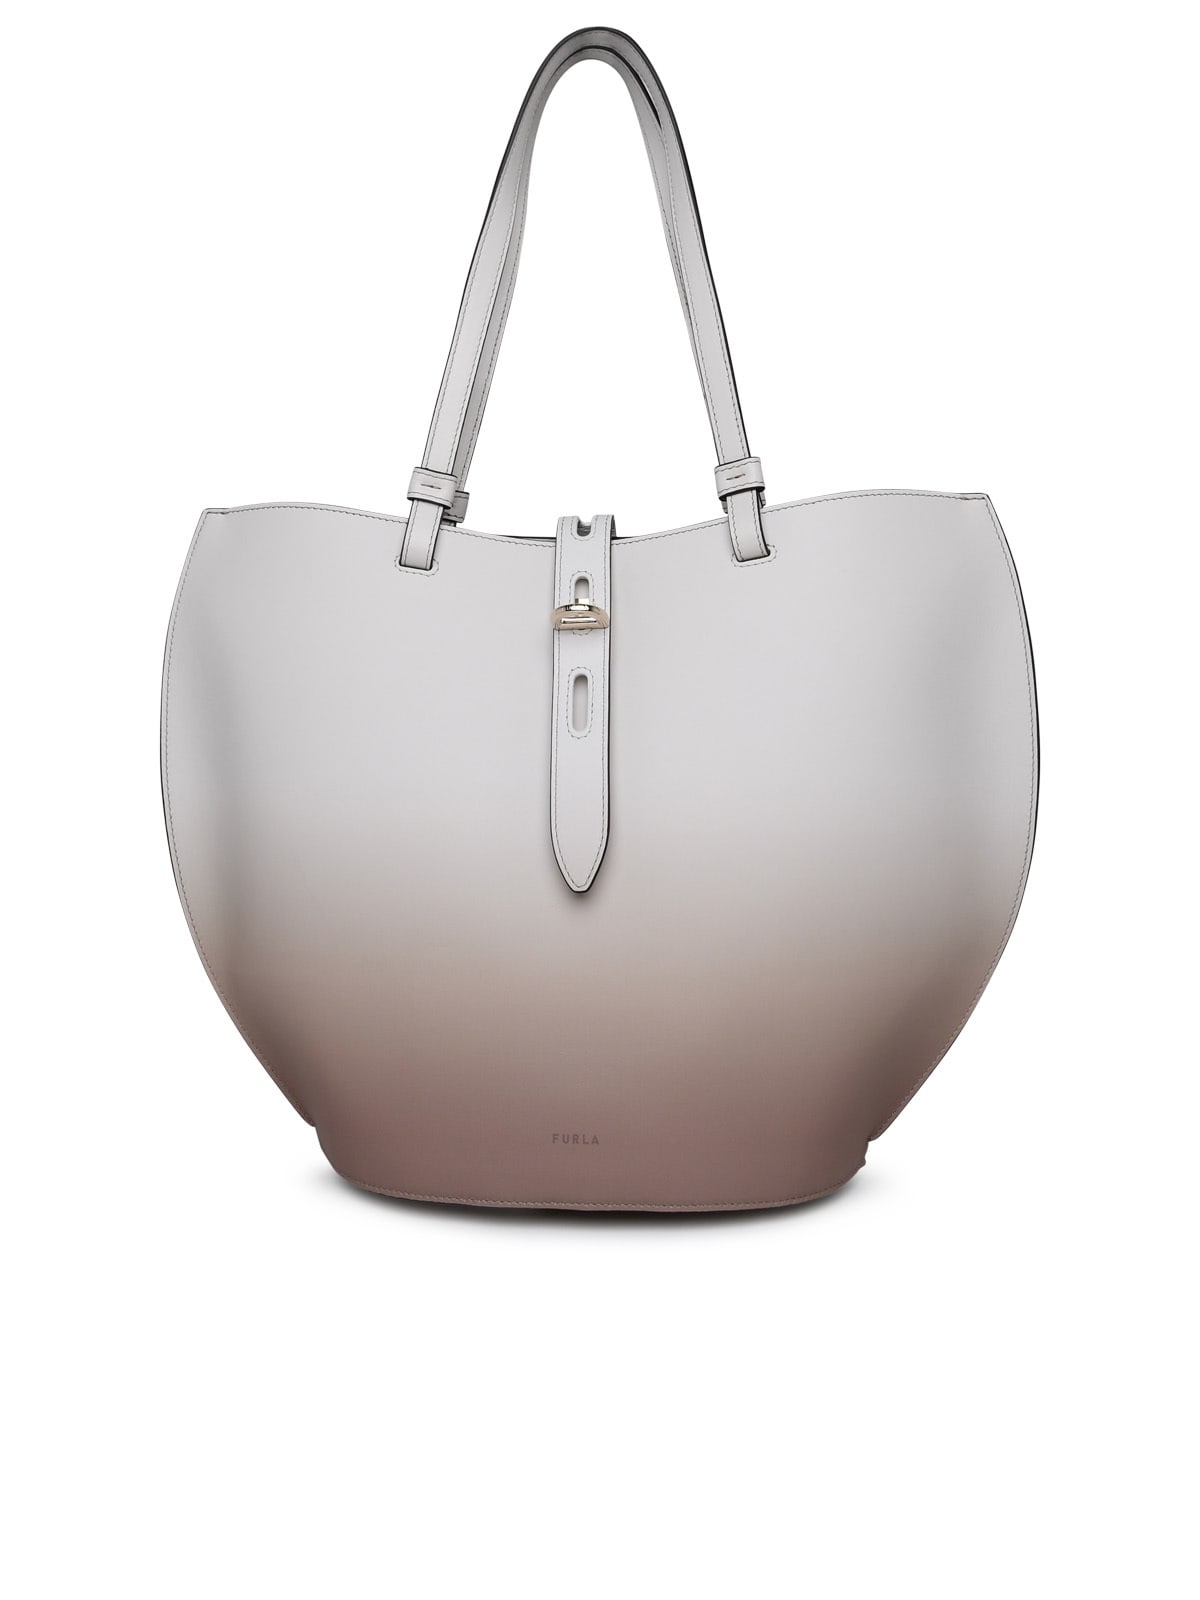 FURLA TWO-COLOR LEATHER BAG